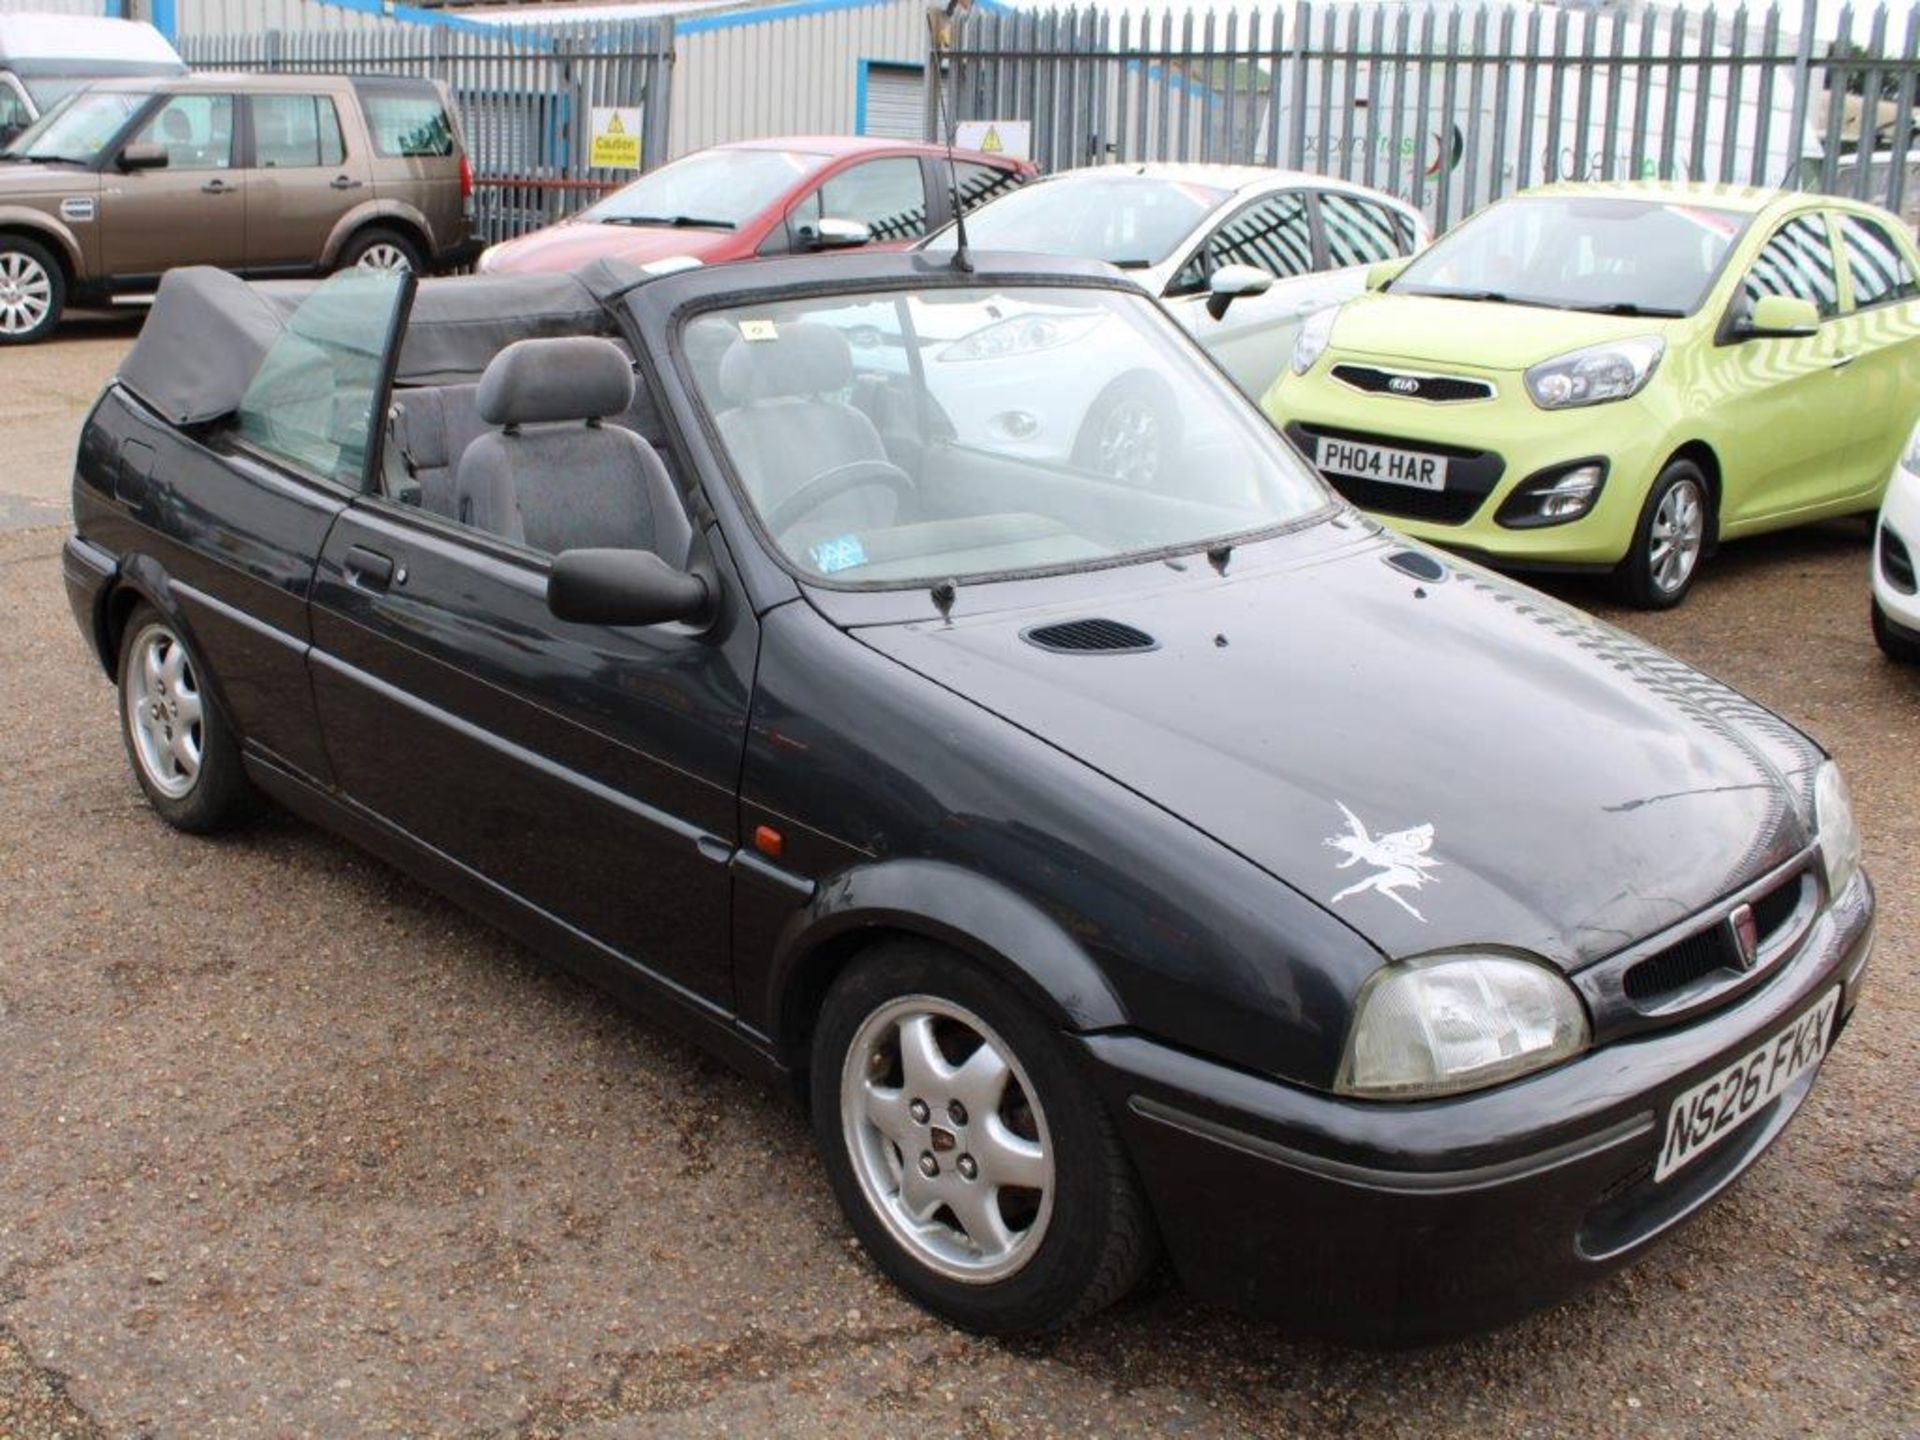 1995 Rover 114 Cabriolet - Image 17 of 17